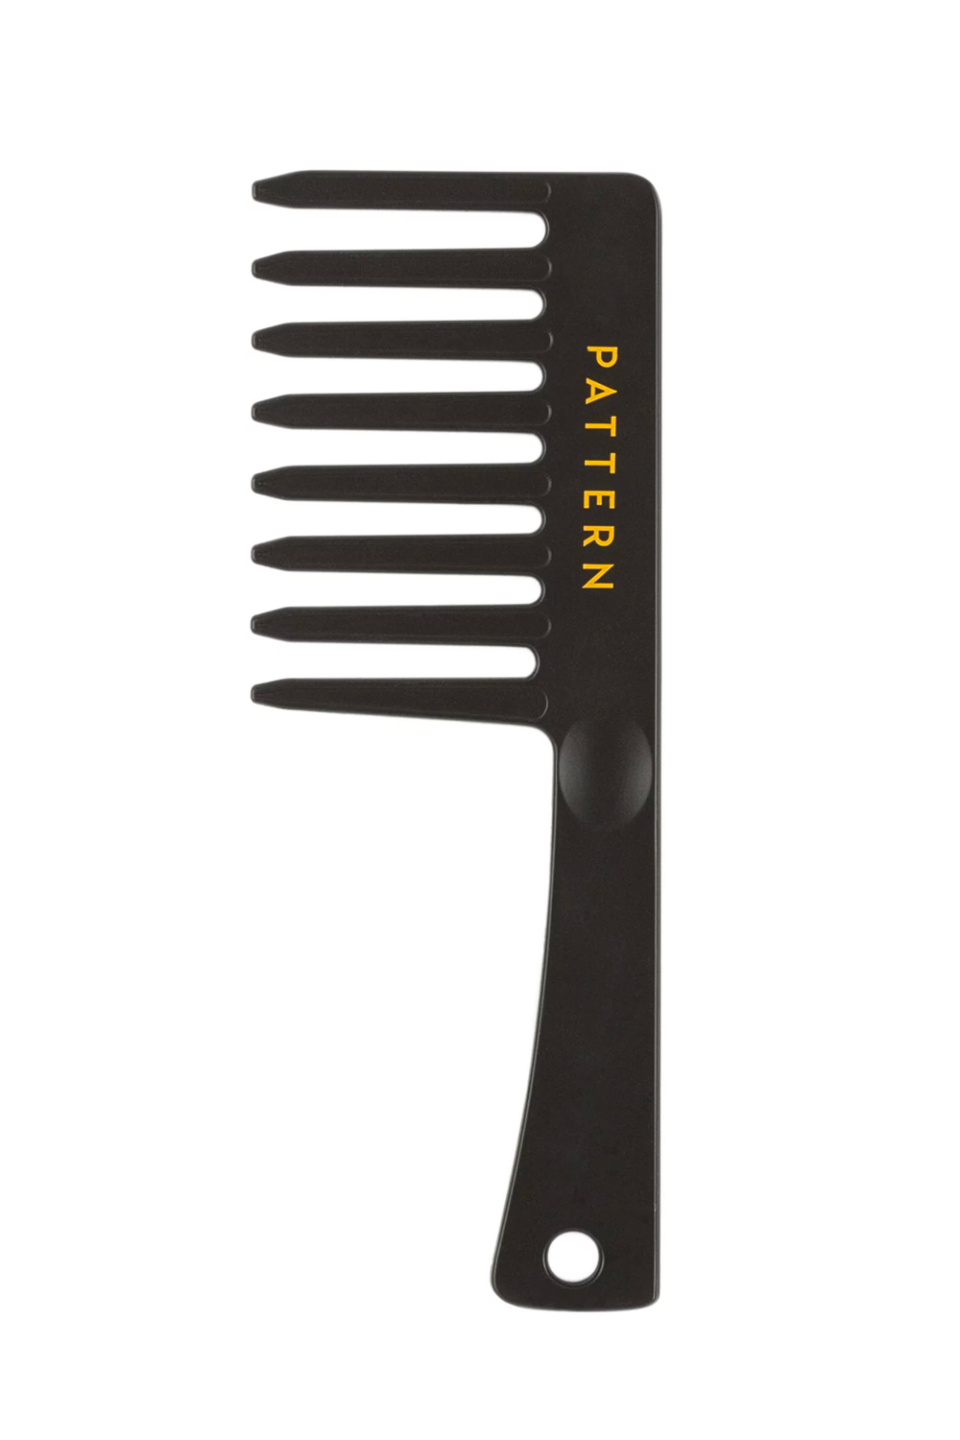 14) Pattern Wide Tooth Comb